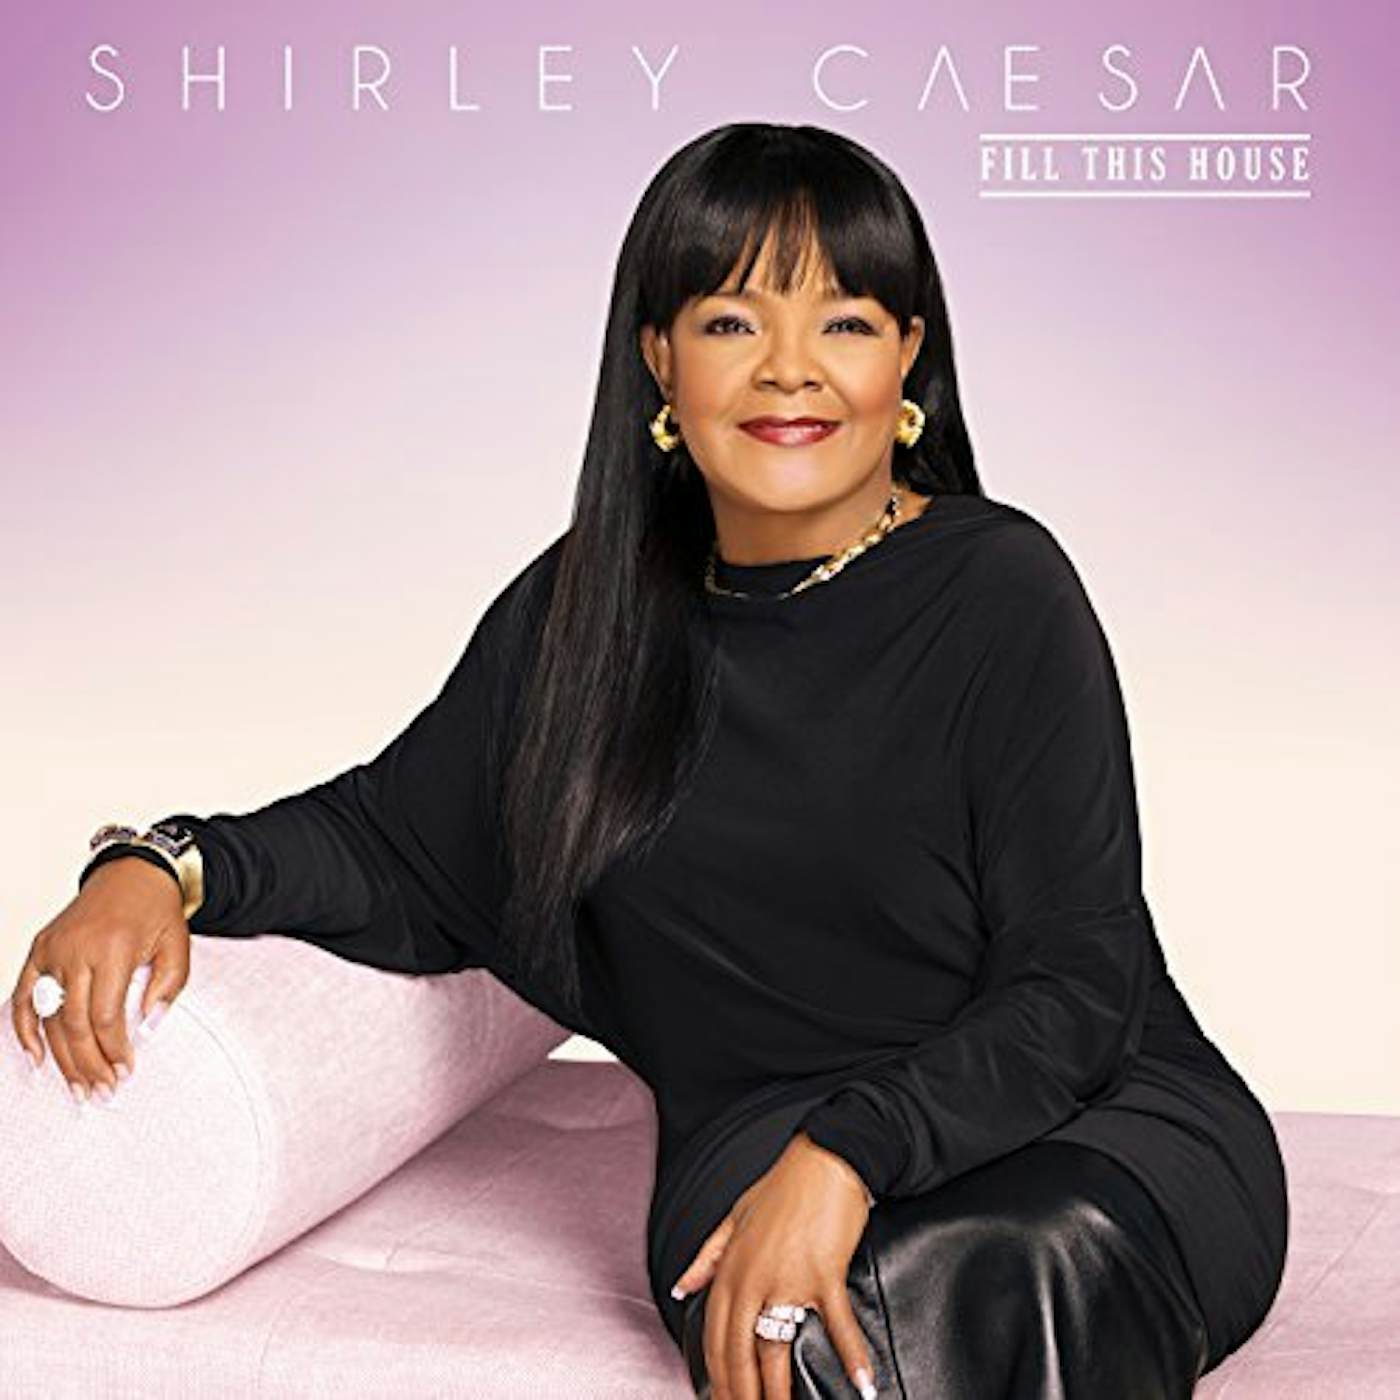 Shirley Caesar FILL THIS HOUSE CD